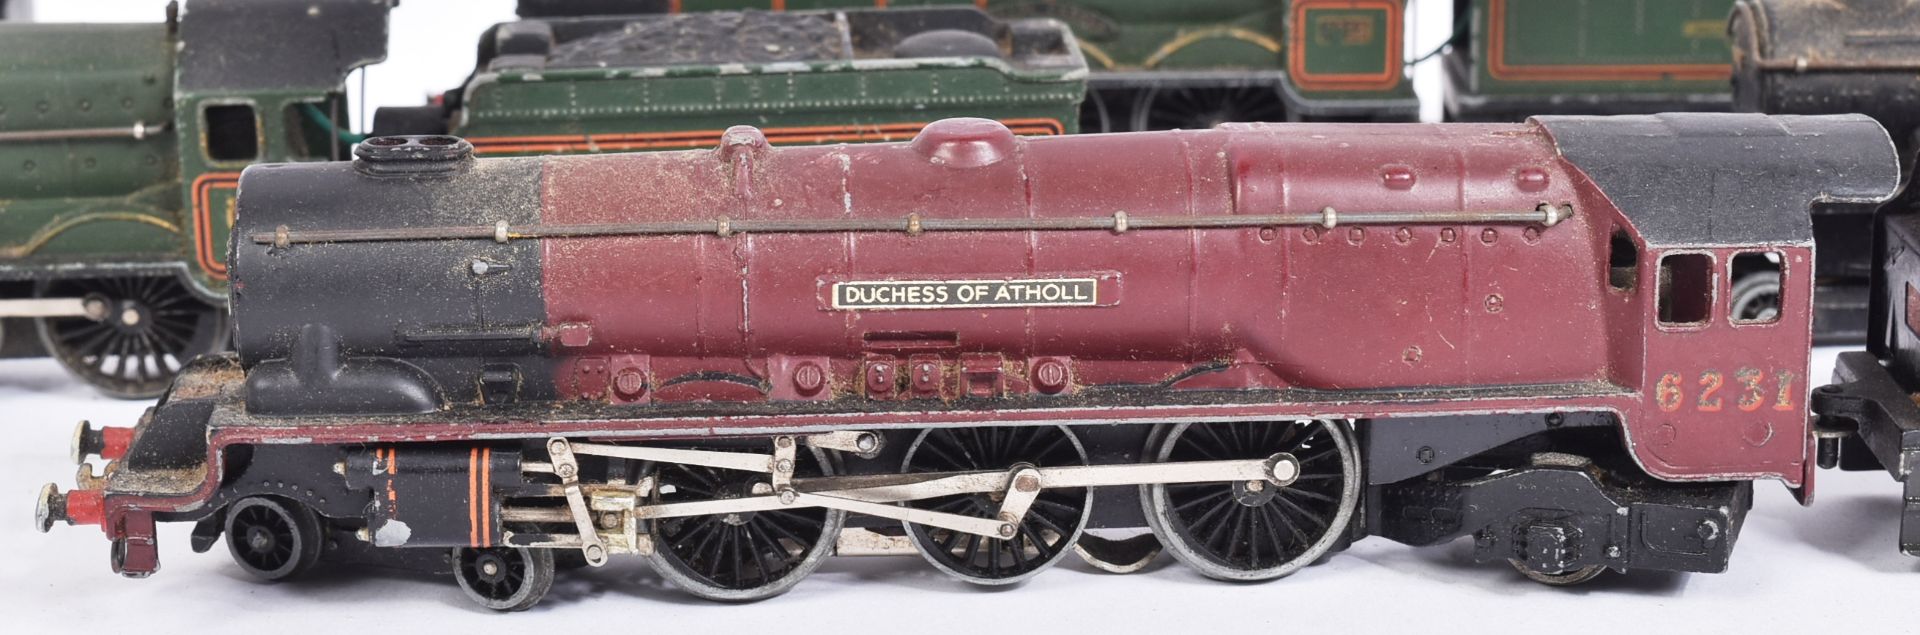 COLLECTION OF ASSORTED HORNBY DUBLO MODEL RAILWAY TRAINSET LOCOMOTIVE ENGINES - Image 4 of 5